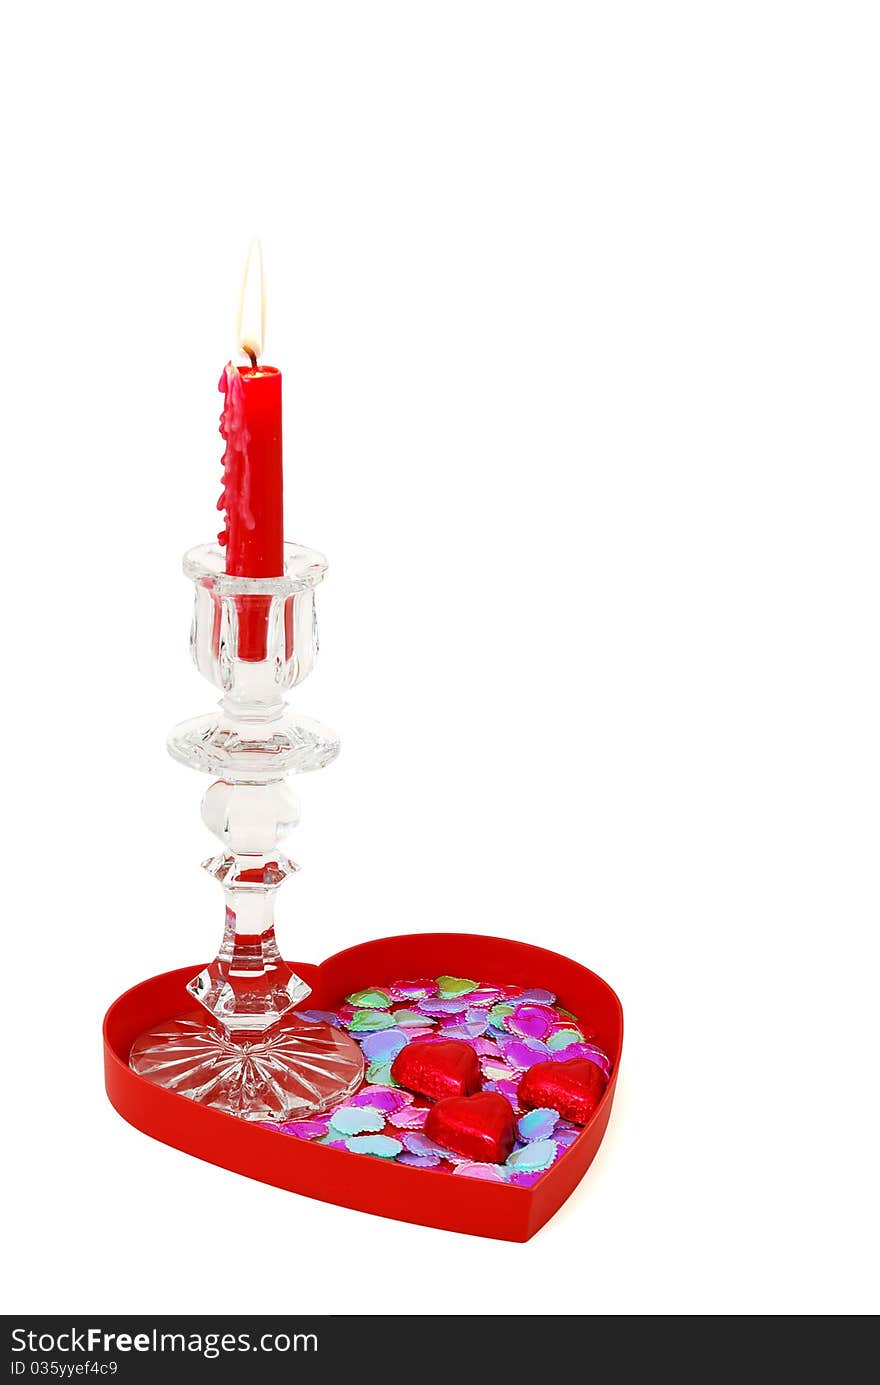 Red candle in glass candlestick on heart shaped tray with candies and sparkles. Red candle in glass candlestick on heart shaped tray with candies and sparkles